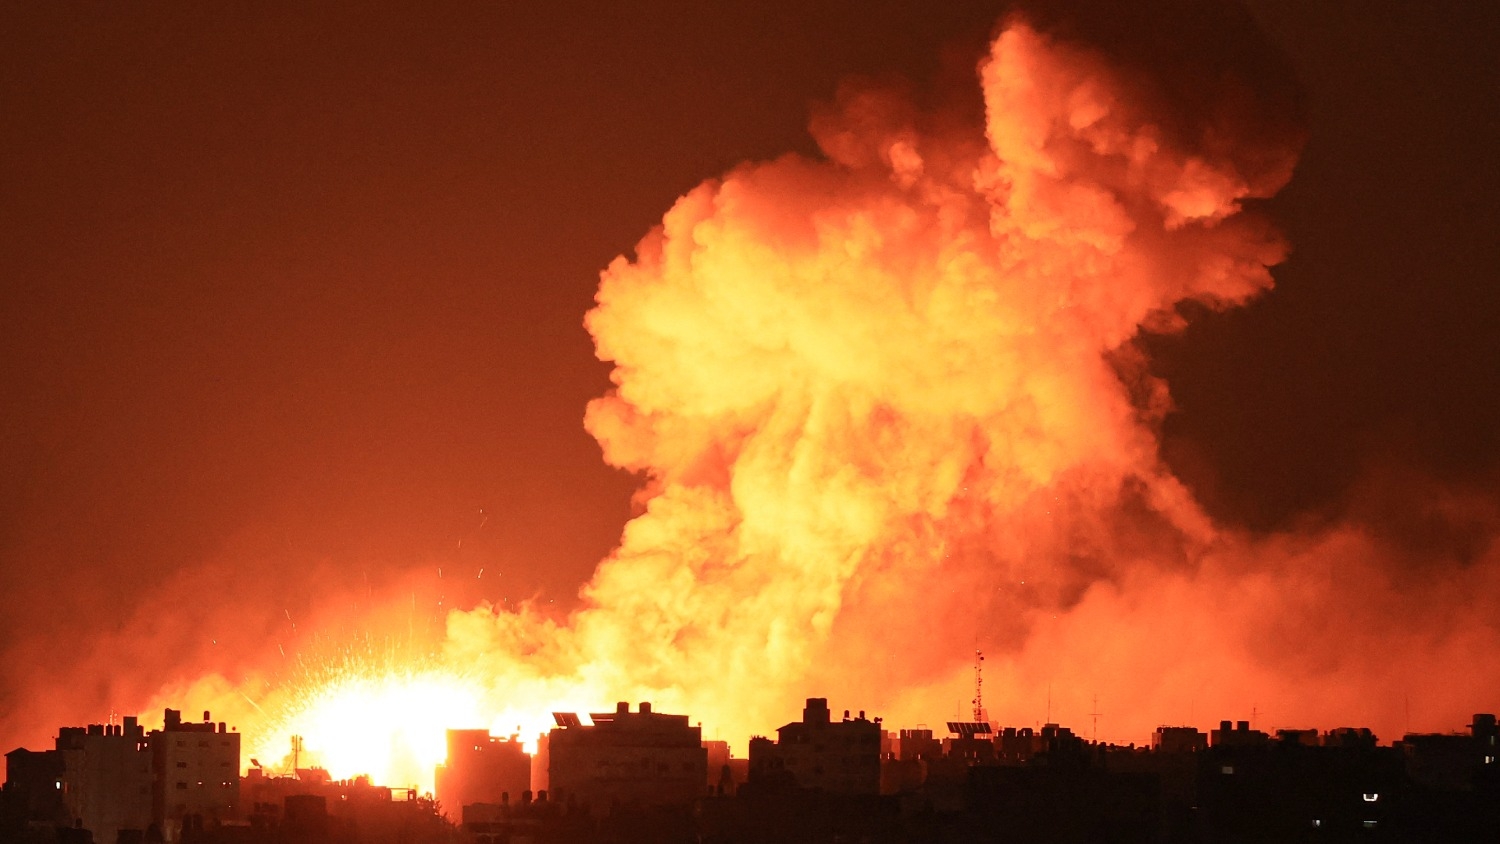 The Israeli air force said it had dropped 6,000 bombs on Gaza in six days, hitting 3,600 targets.